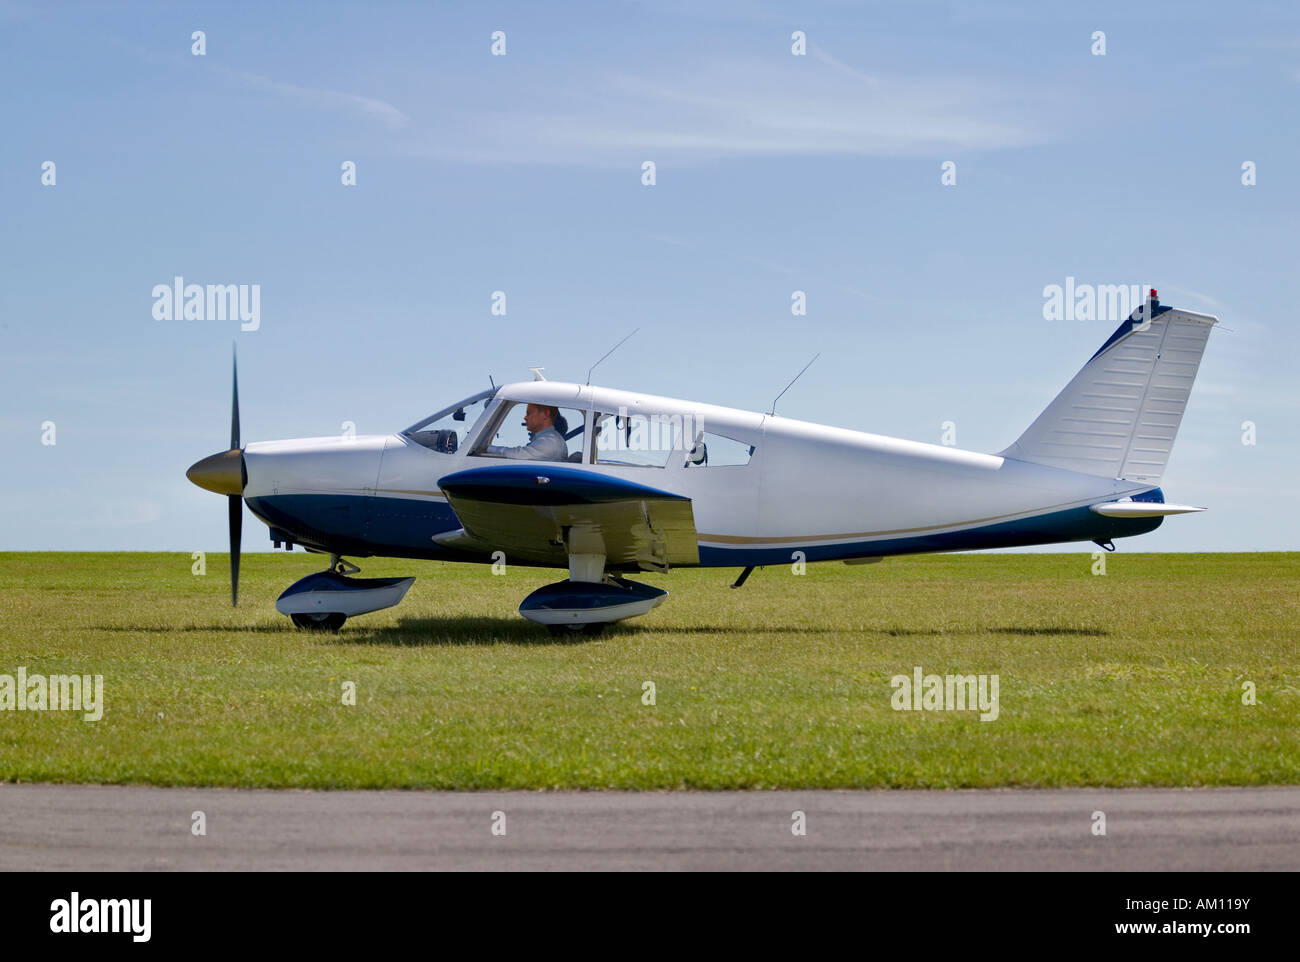 Light aircraft taxiing on a grass runway about to take off Stock Photo